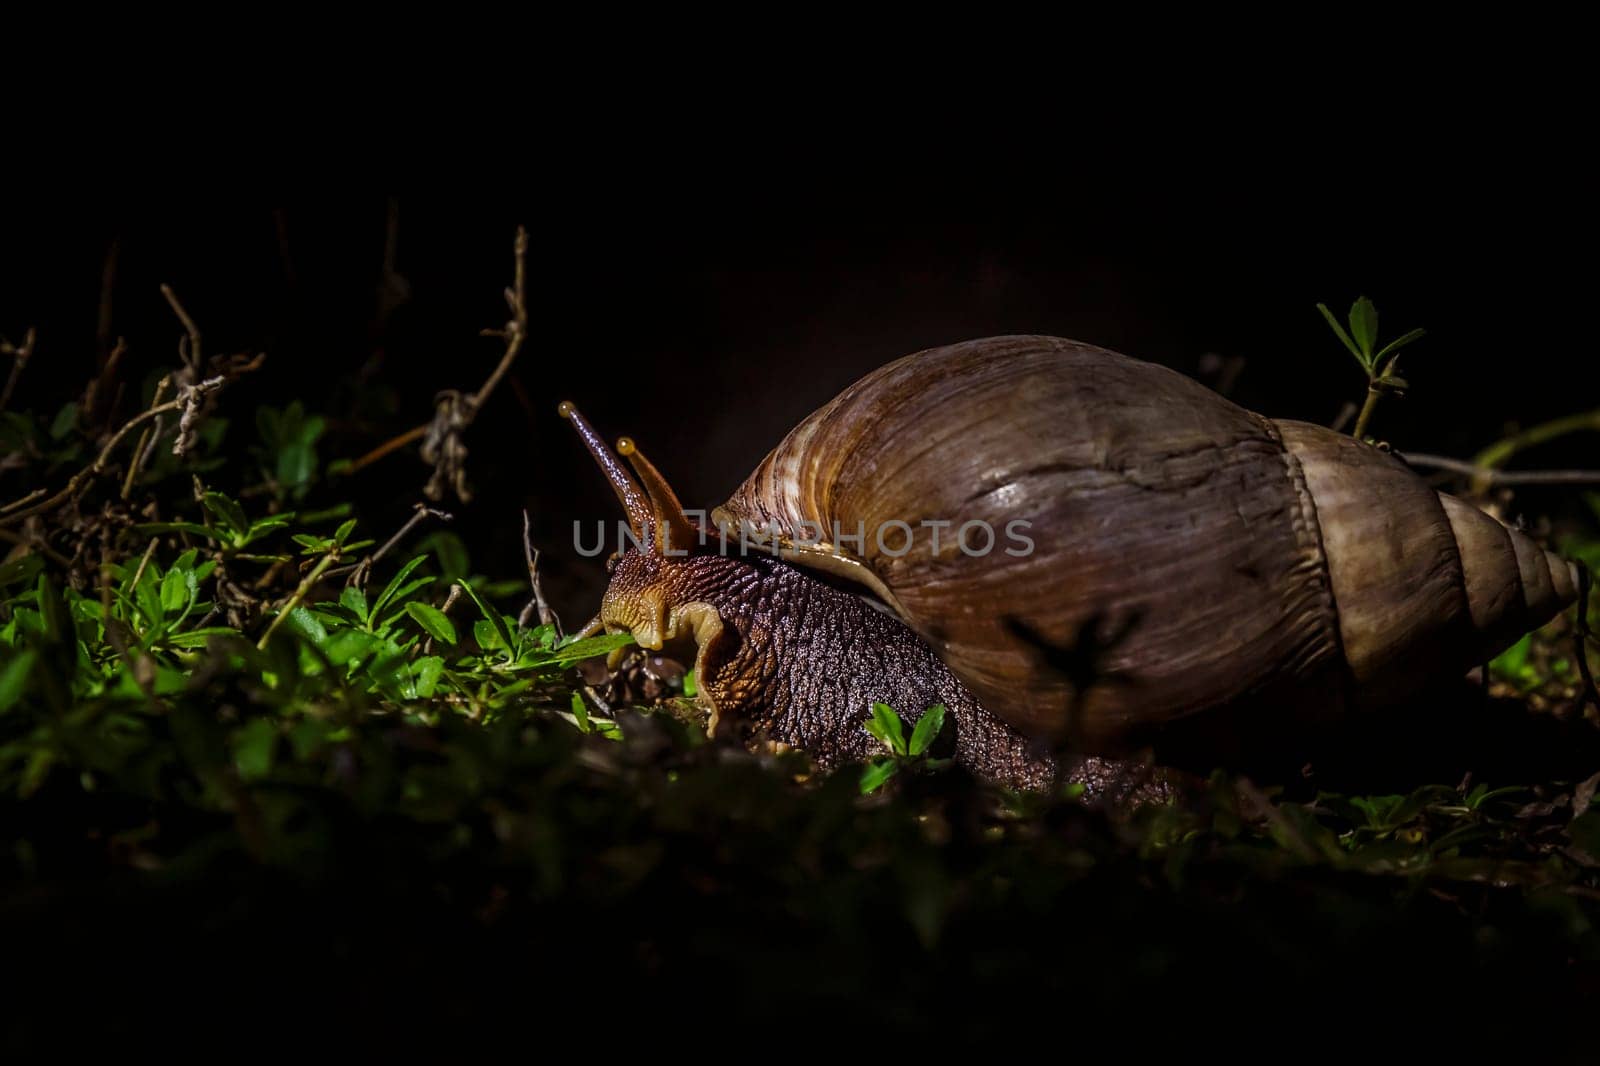 Giant African land snail moving in the grass by night in Kruger National park, South Africa ; Specie Lissachatina fulica family of Lissachatina fulica